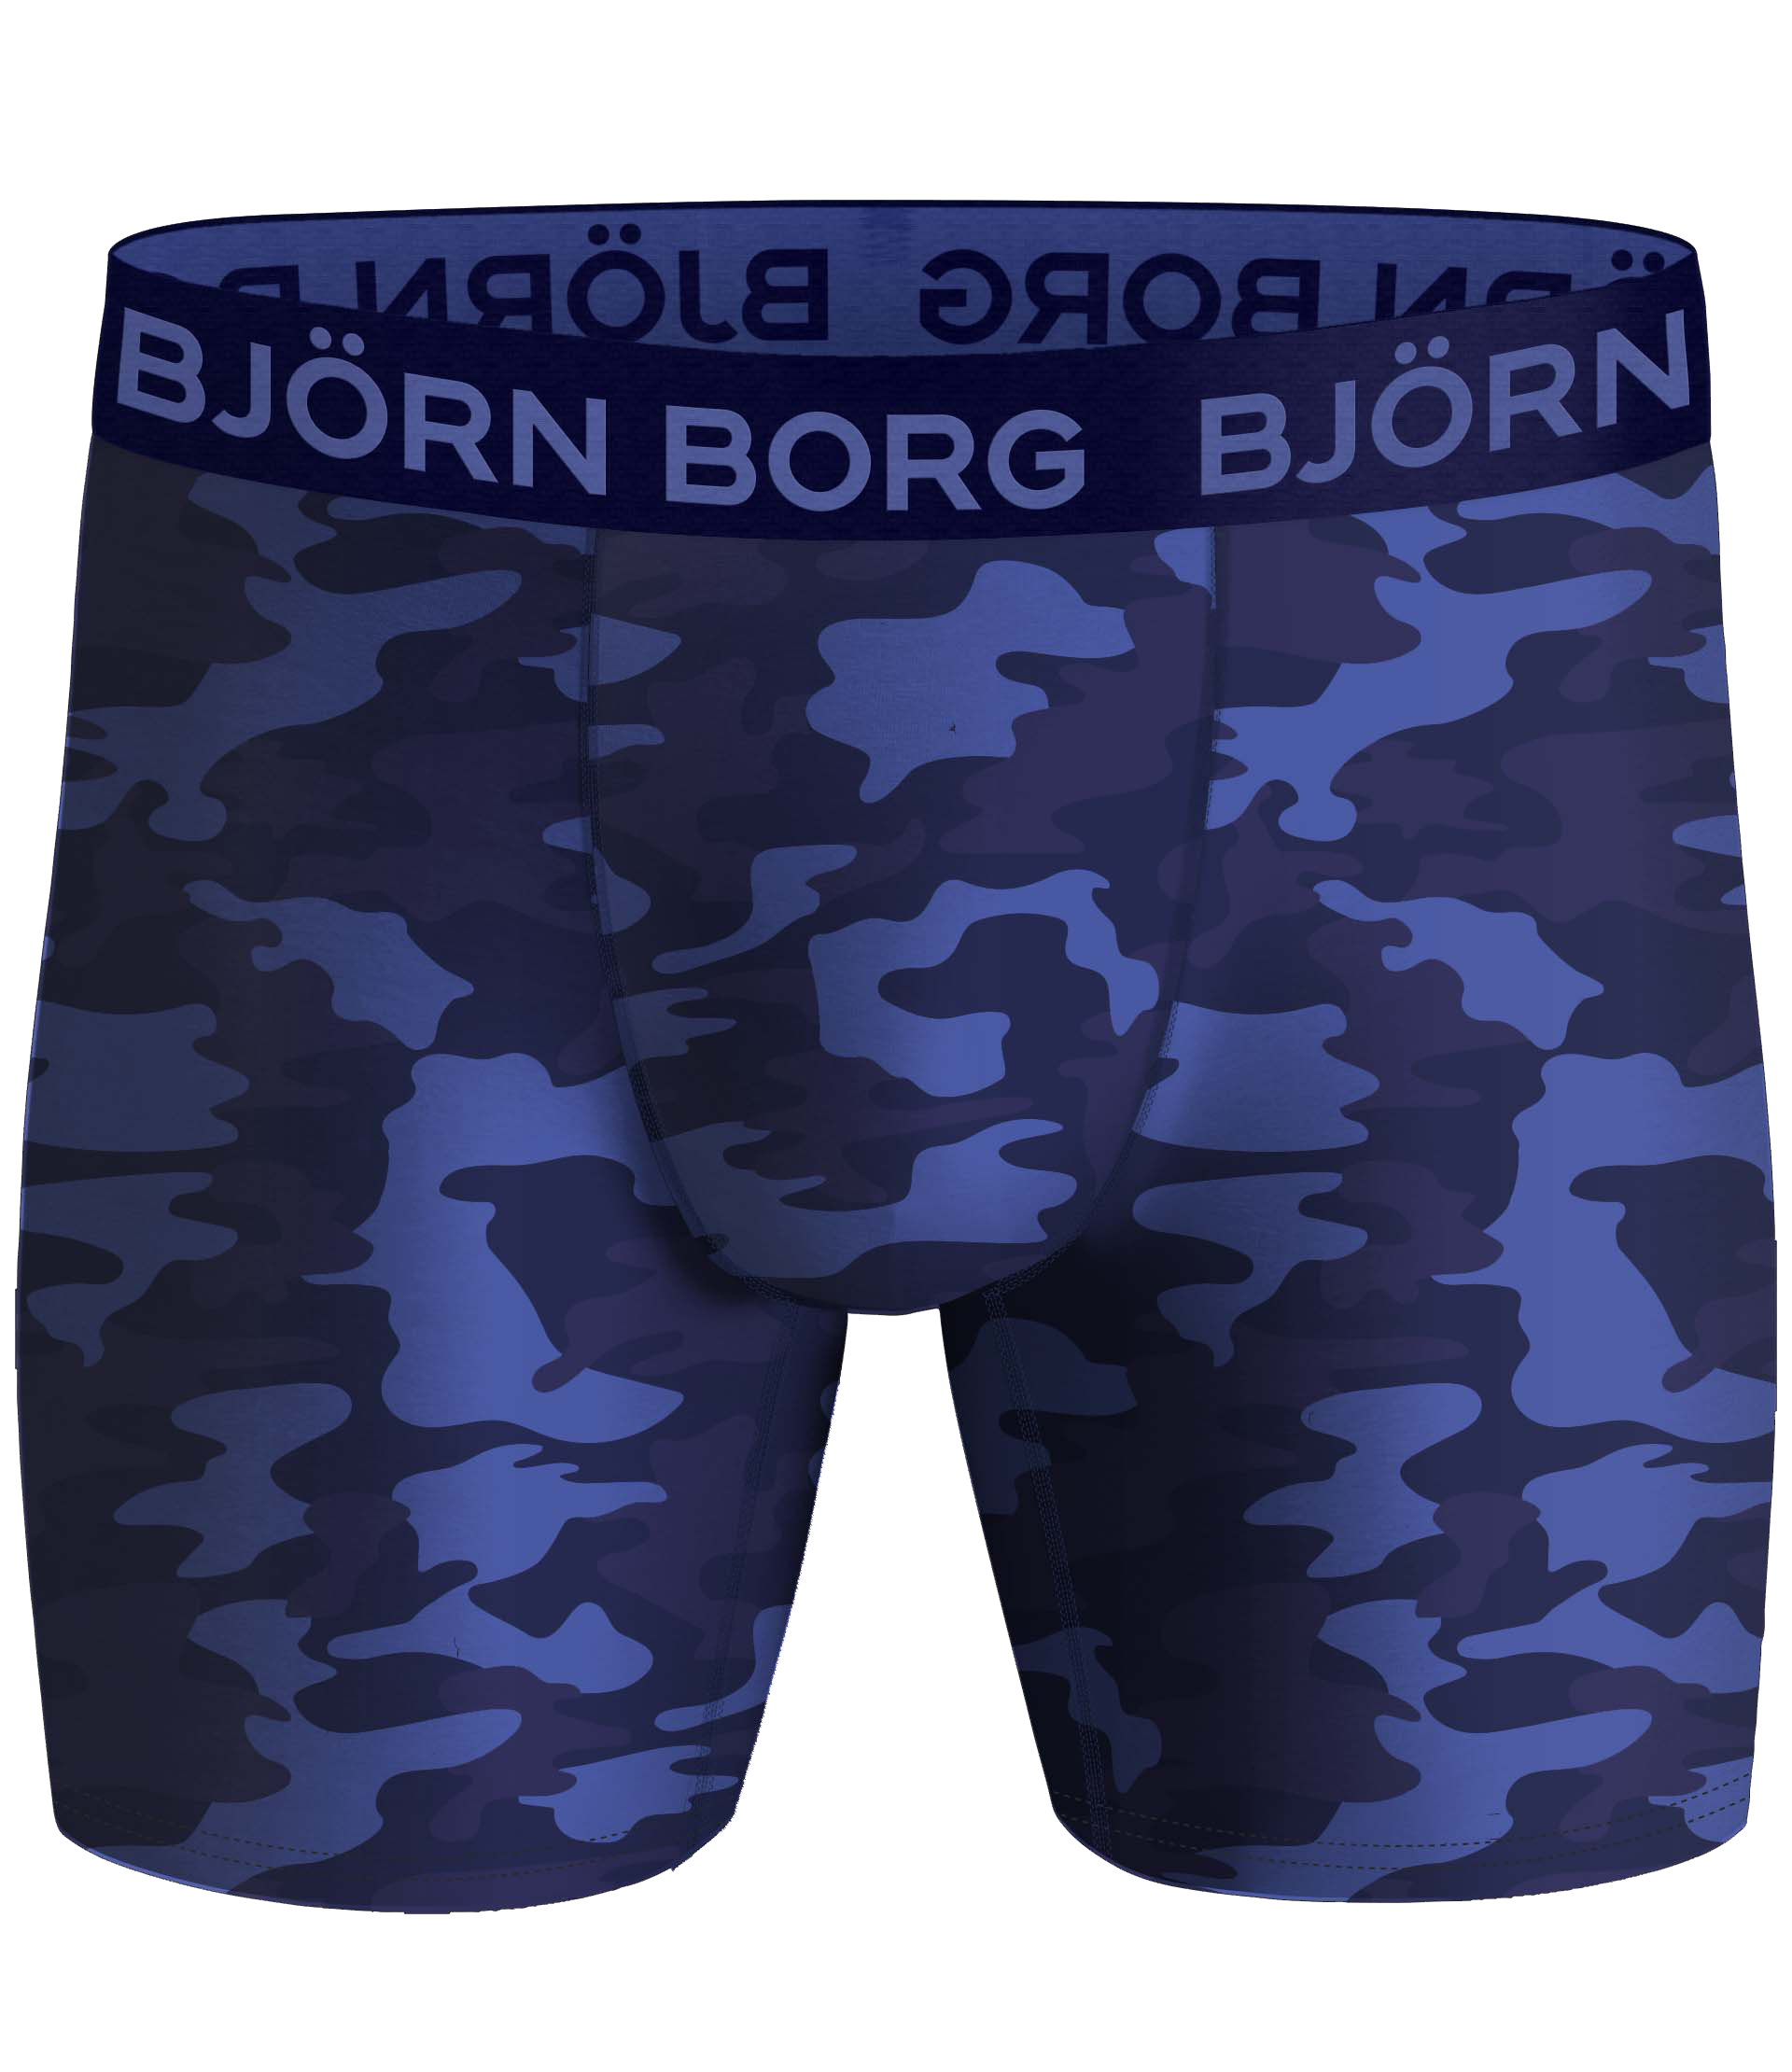 Björn Borg - High performance underwear with the perfect fit. Treated with  Hydro Pro functionality to keep you dry. www.bjornborg.com